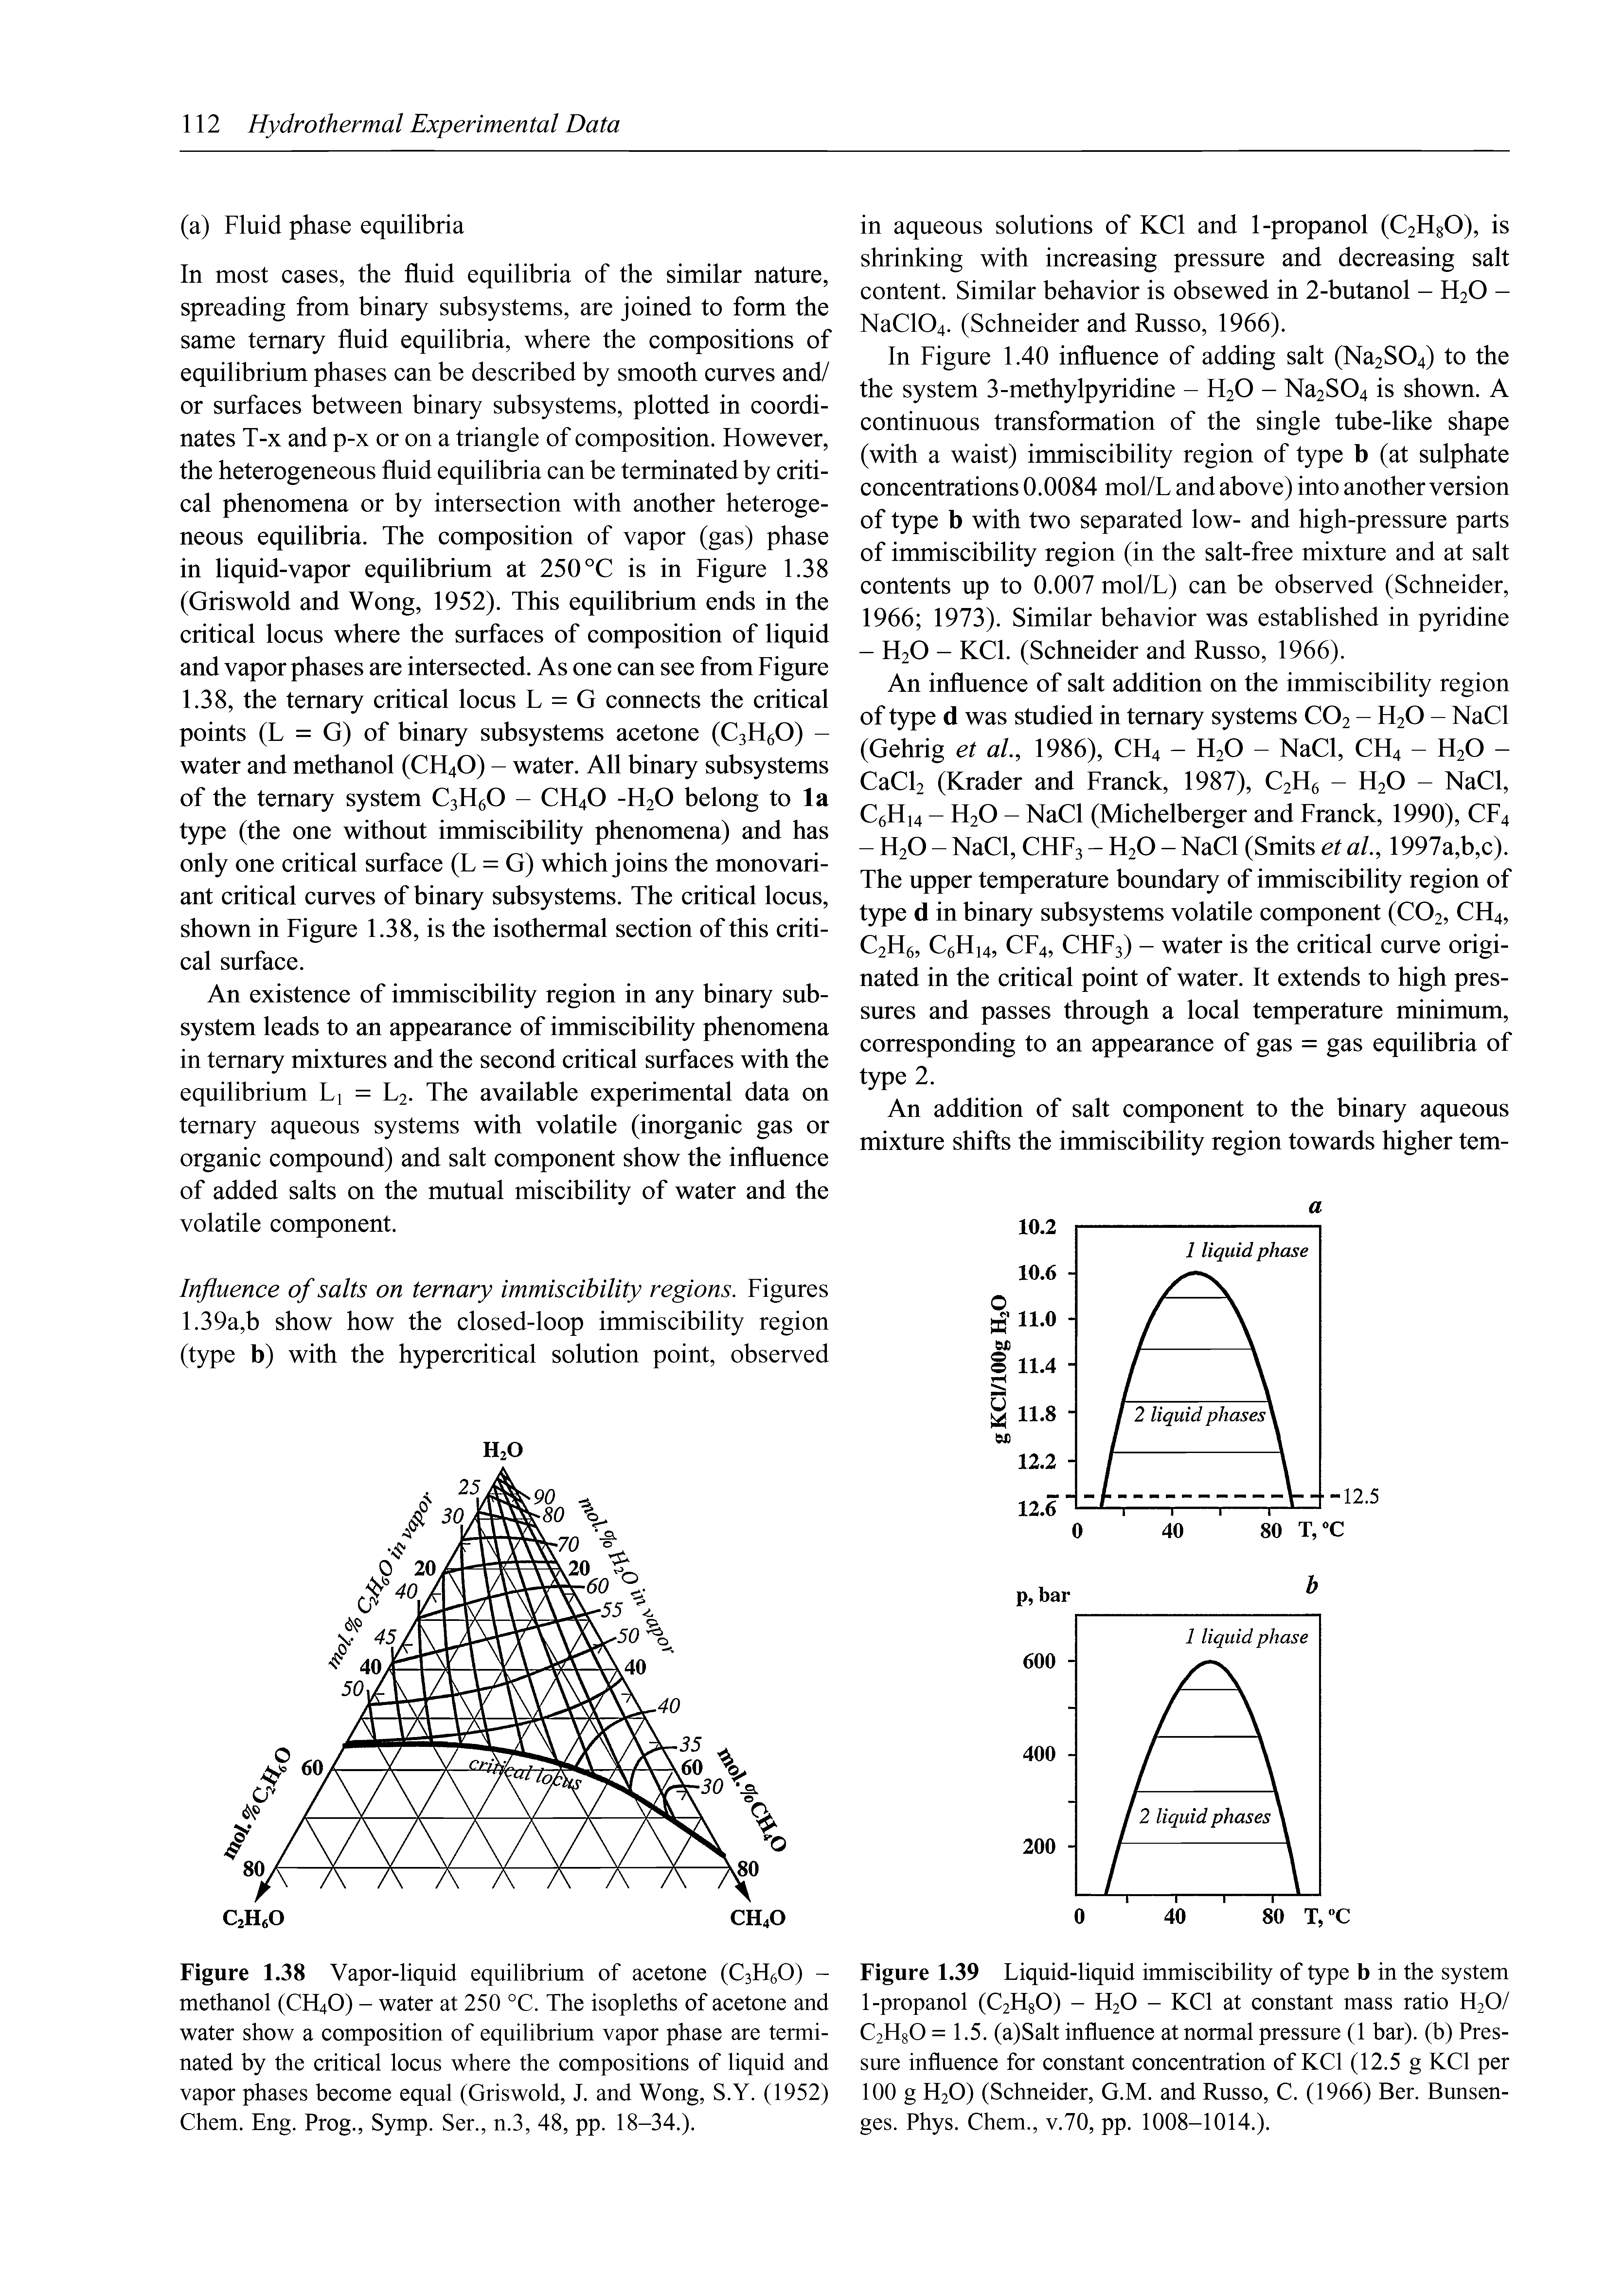 Figure 1.38 Vapor-liquid equilibrium of acetone (C3H6O) -methanol (CH4O) - water at 250 °C. The isopleths of acetone and water show a composition of equilibrium vapor phase are terminated by the critical locus where the compositions of liquid and vapor phases become equal (Griswold, J. and Wong, S.Y. (1952) Chem. Eng. Prog., Symp. Ser., n.3, 48, pp. 18-34.).